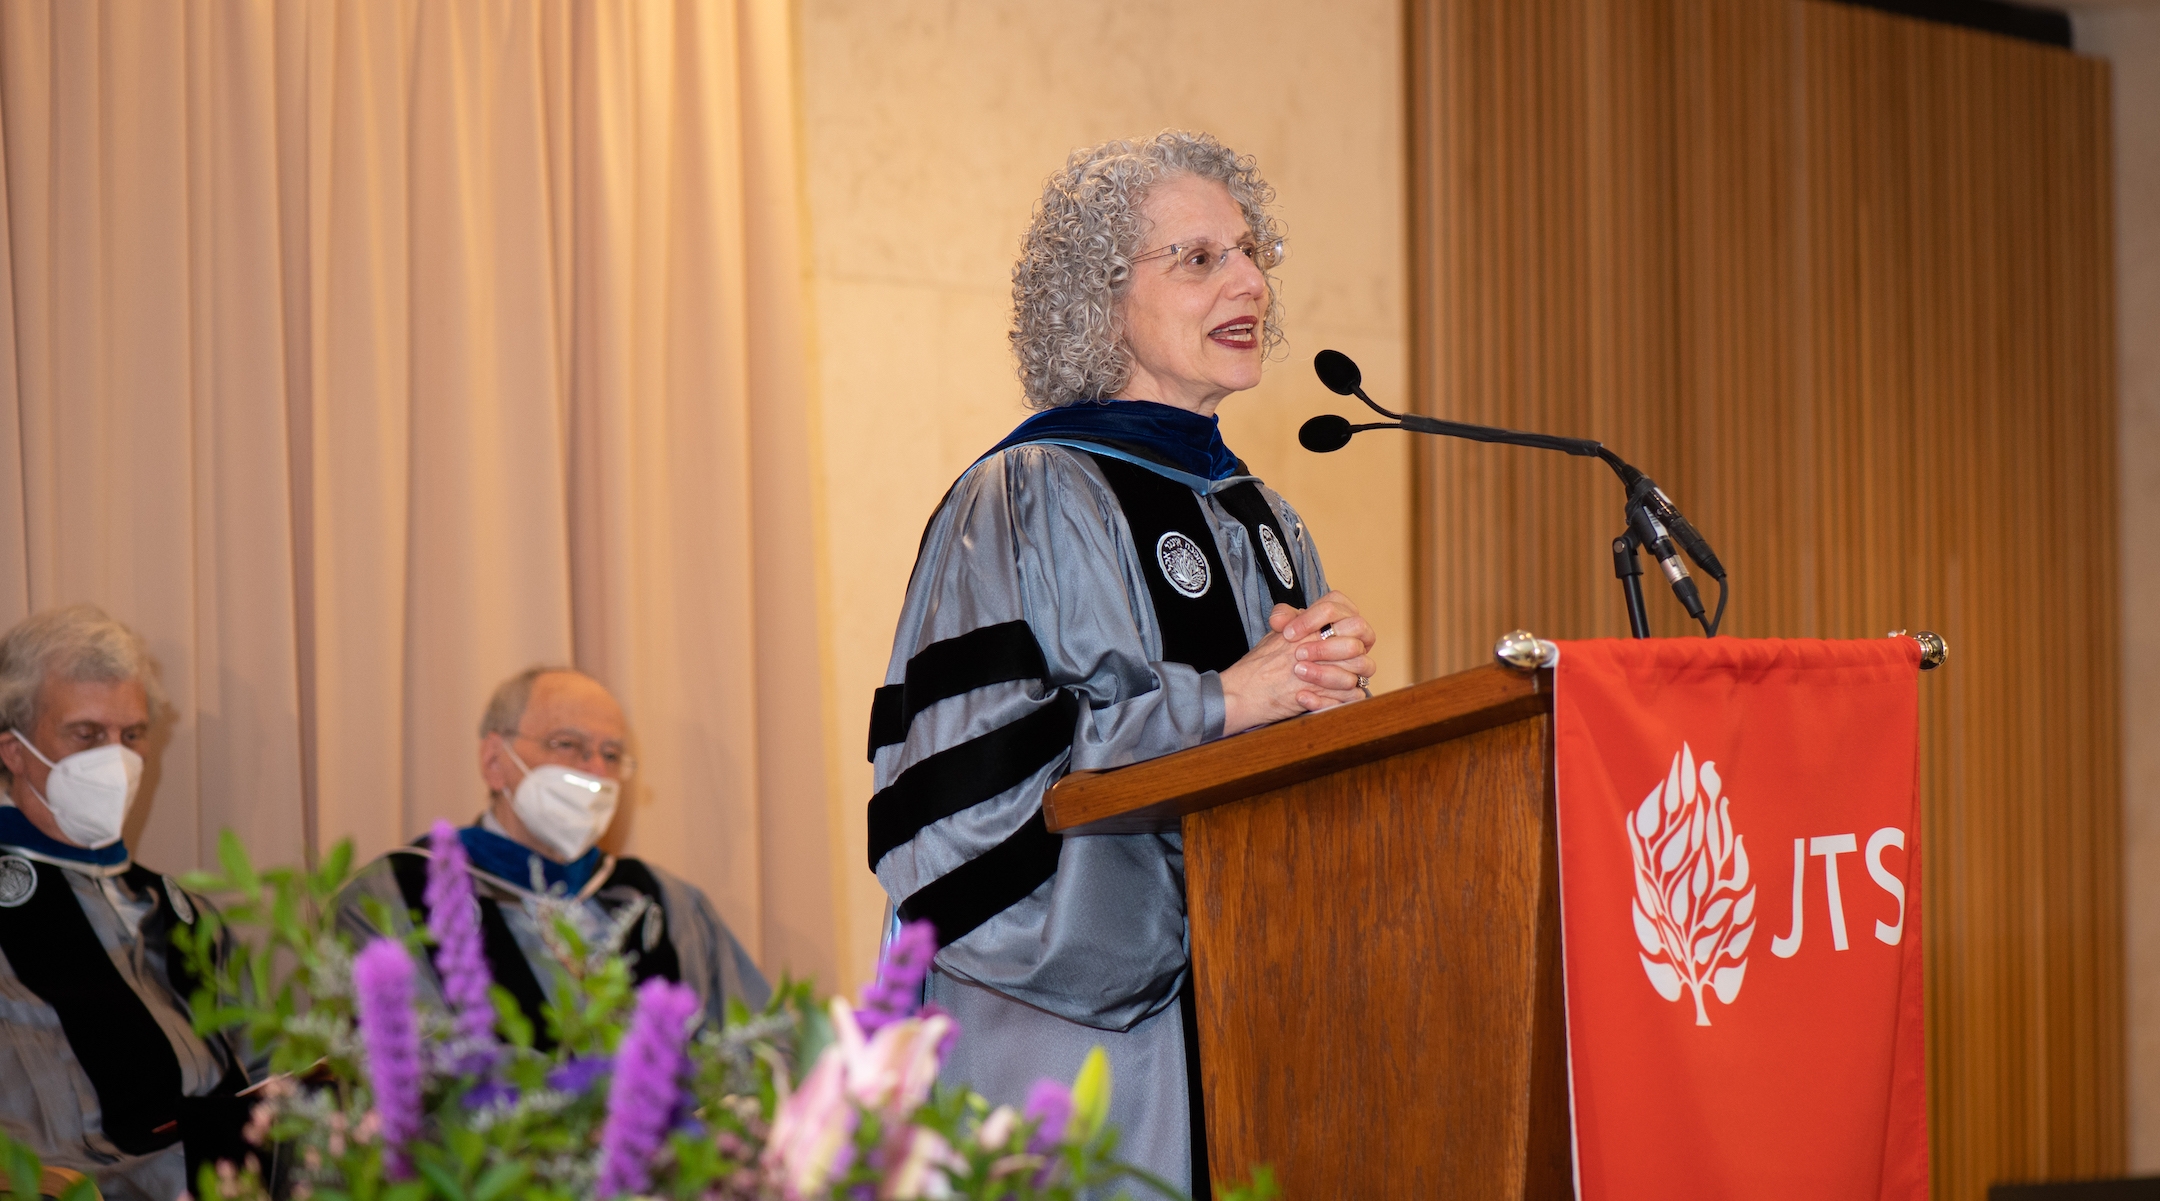 2 years after she was picked to lead JTS, Shuly Rubin Schwartz inaugurated as first woman chancellor